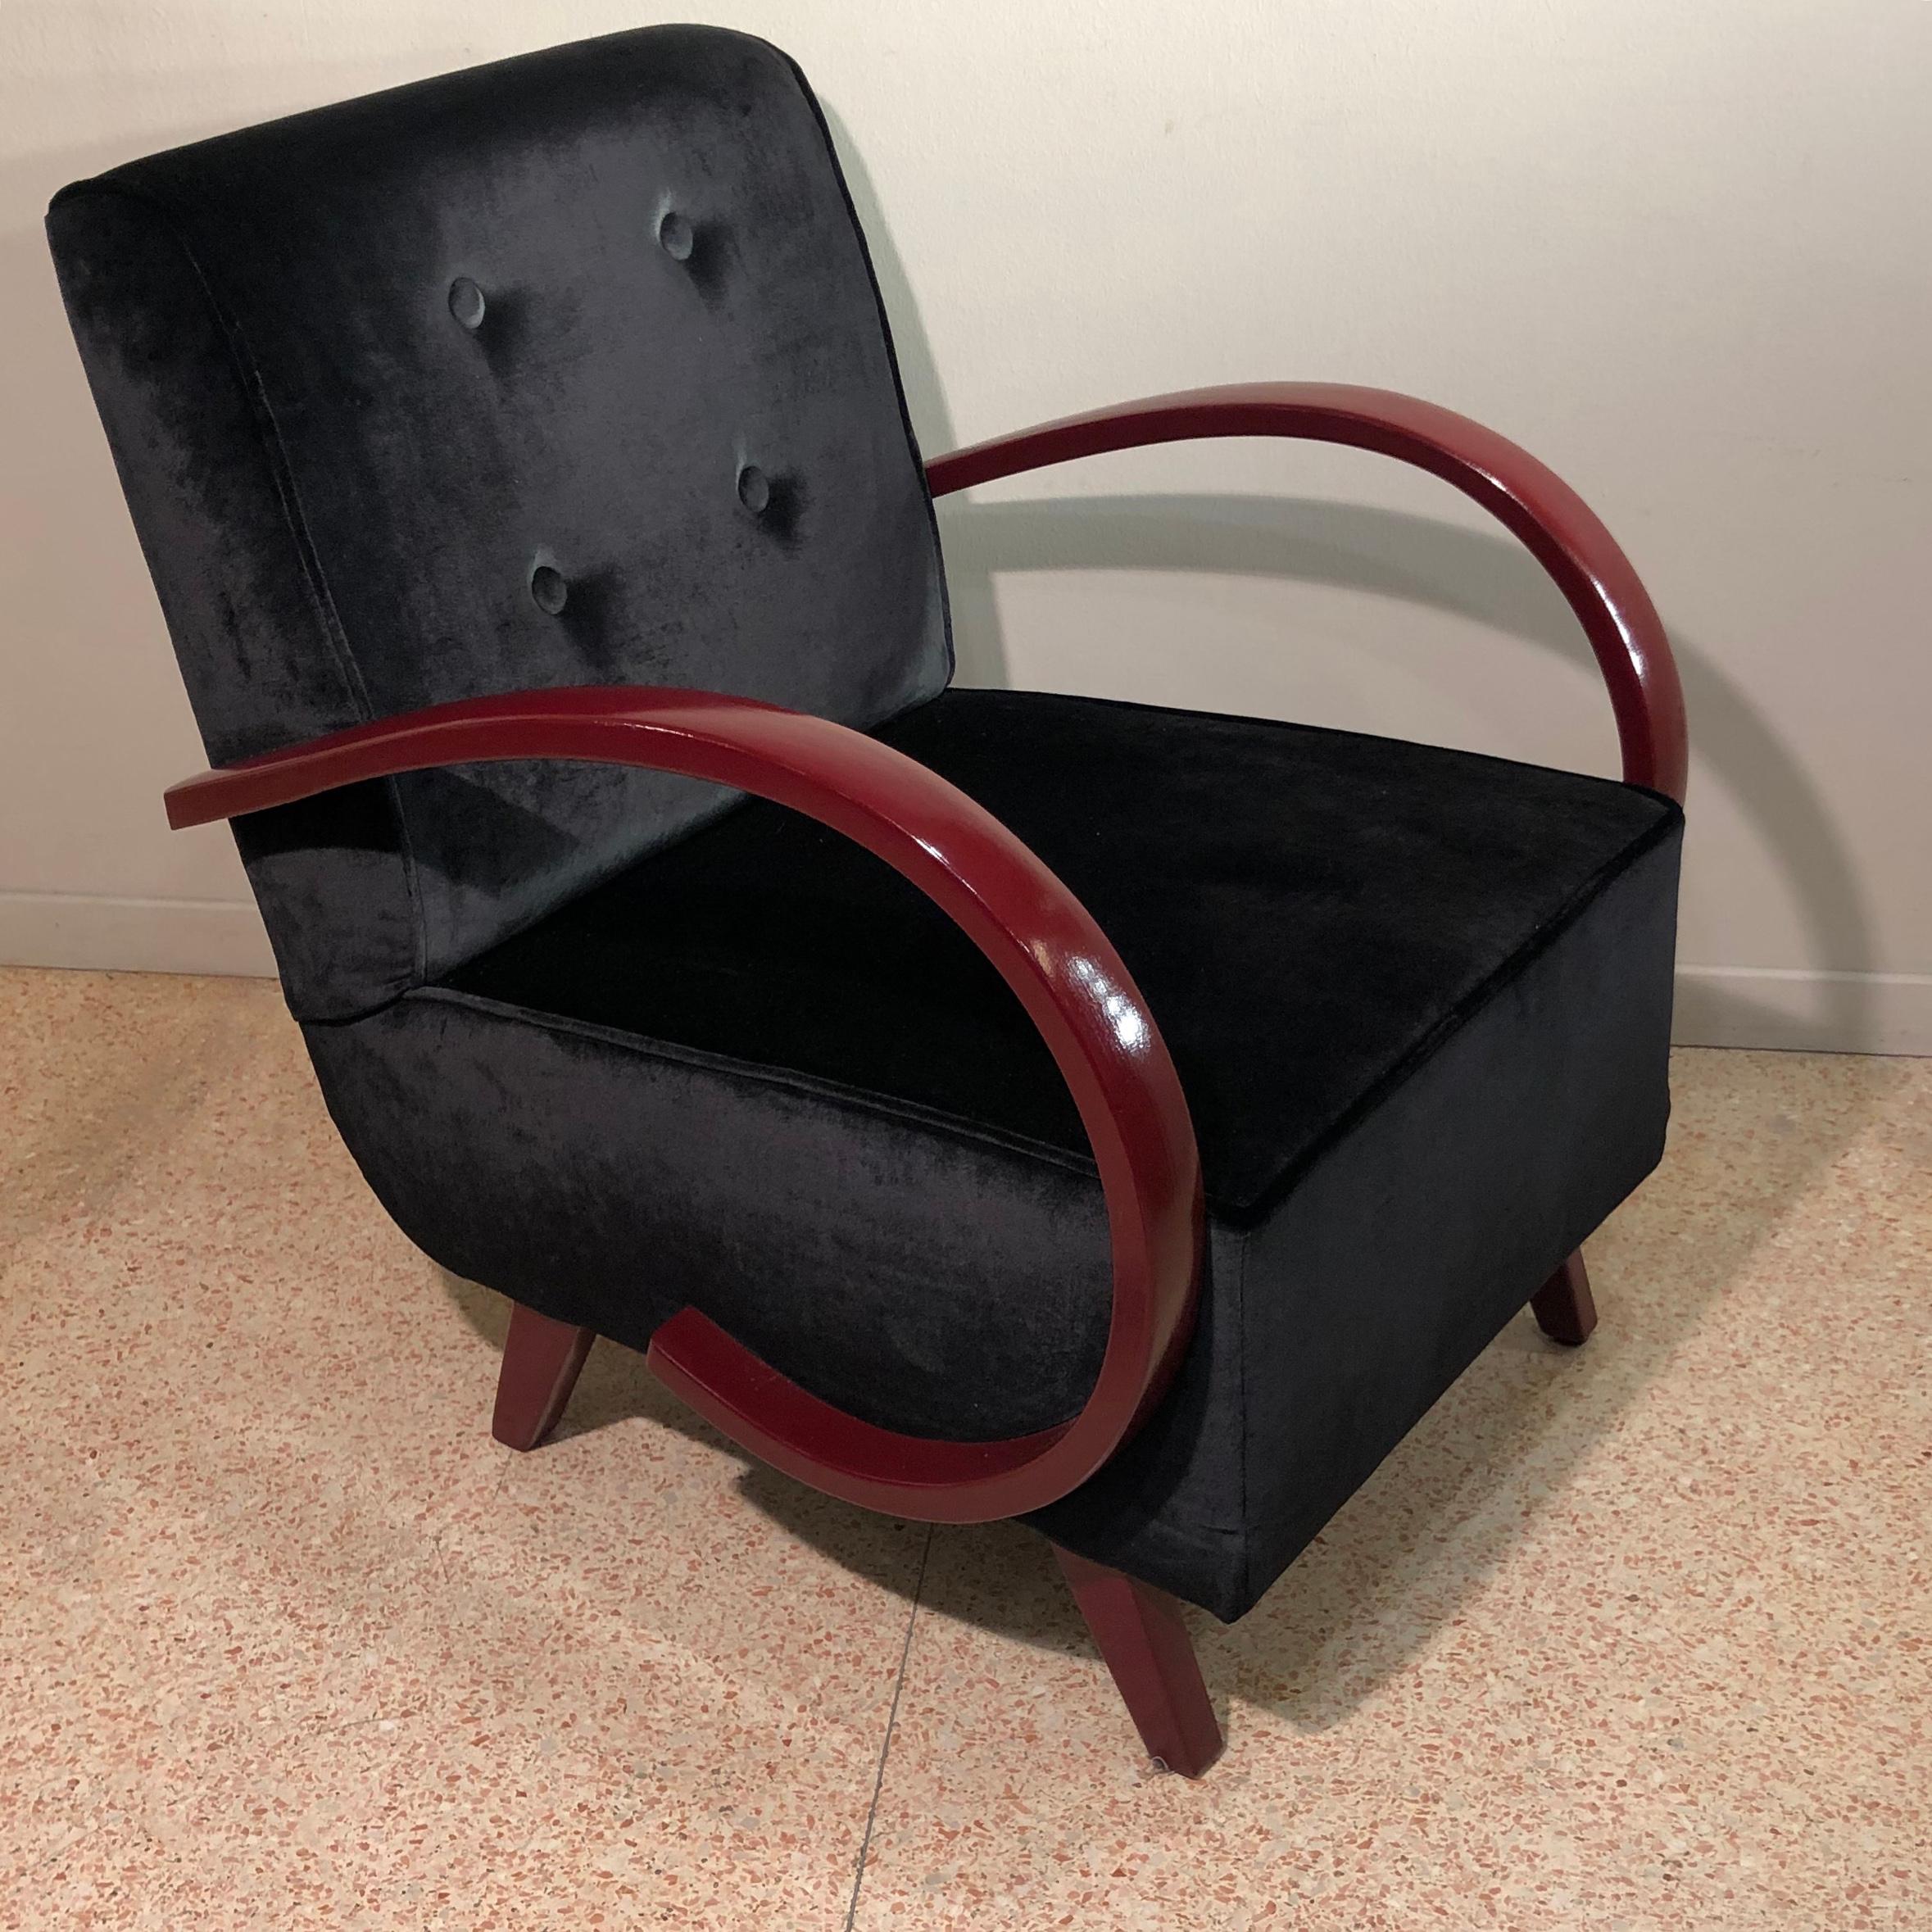 Pair of Art Deco armchairs from 1930s period. Black silk velvet and dark red wood lacquered armrests. Deep and large seat. Reupholstered and restored in a conservative way in the wooden parts. Since they are finely finished on the back with black